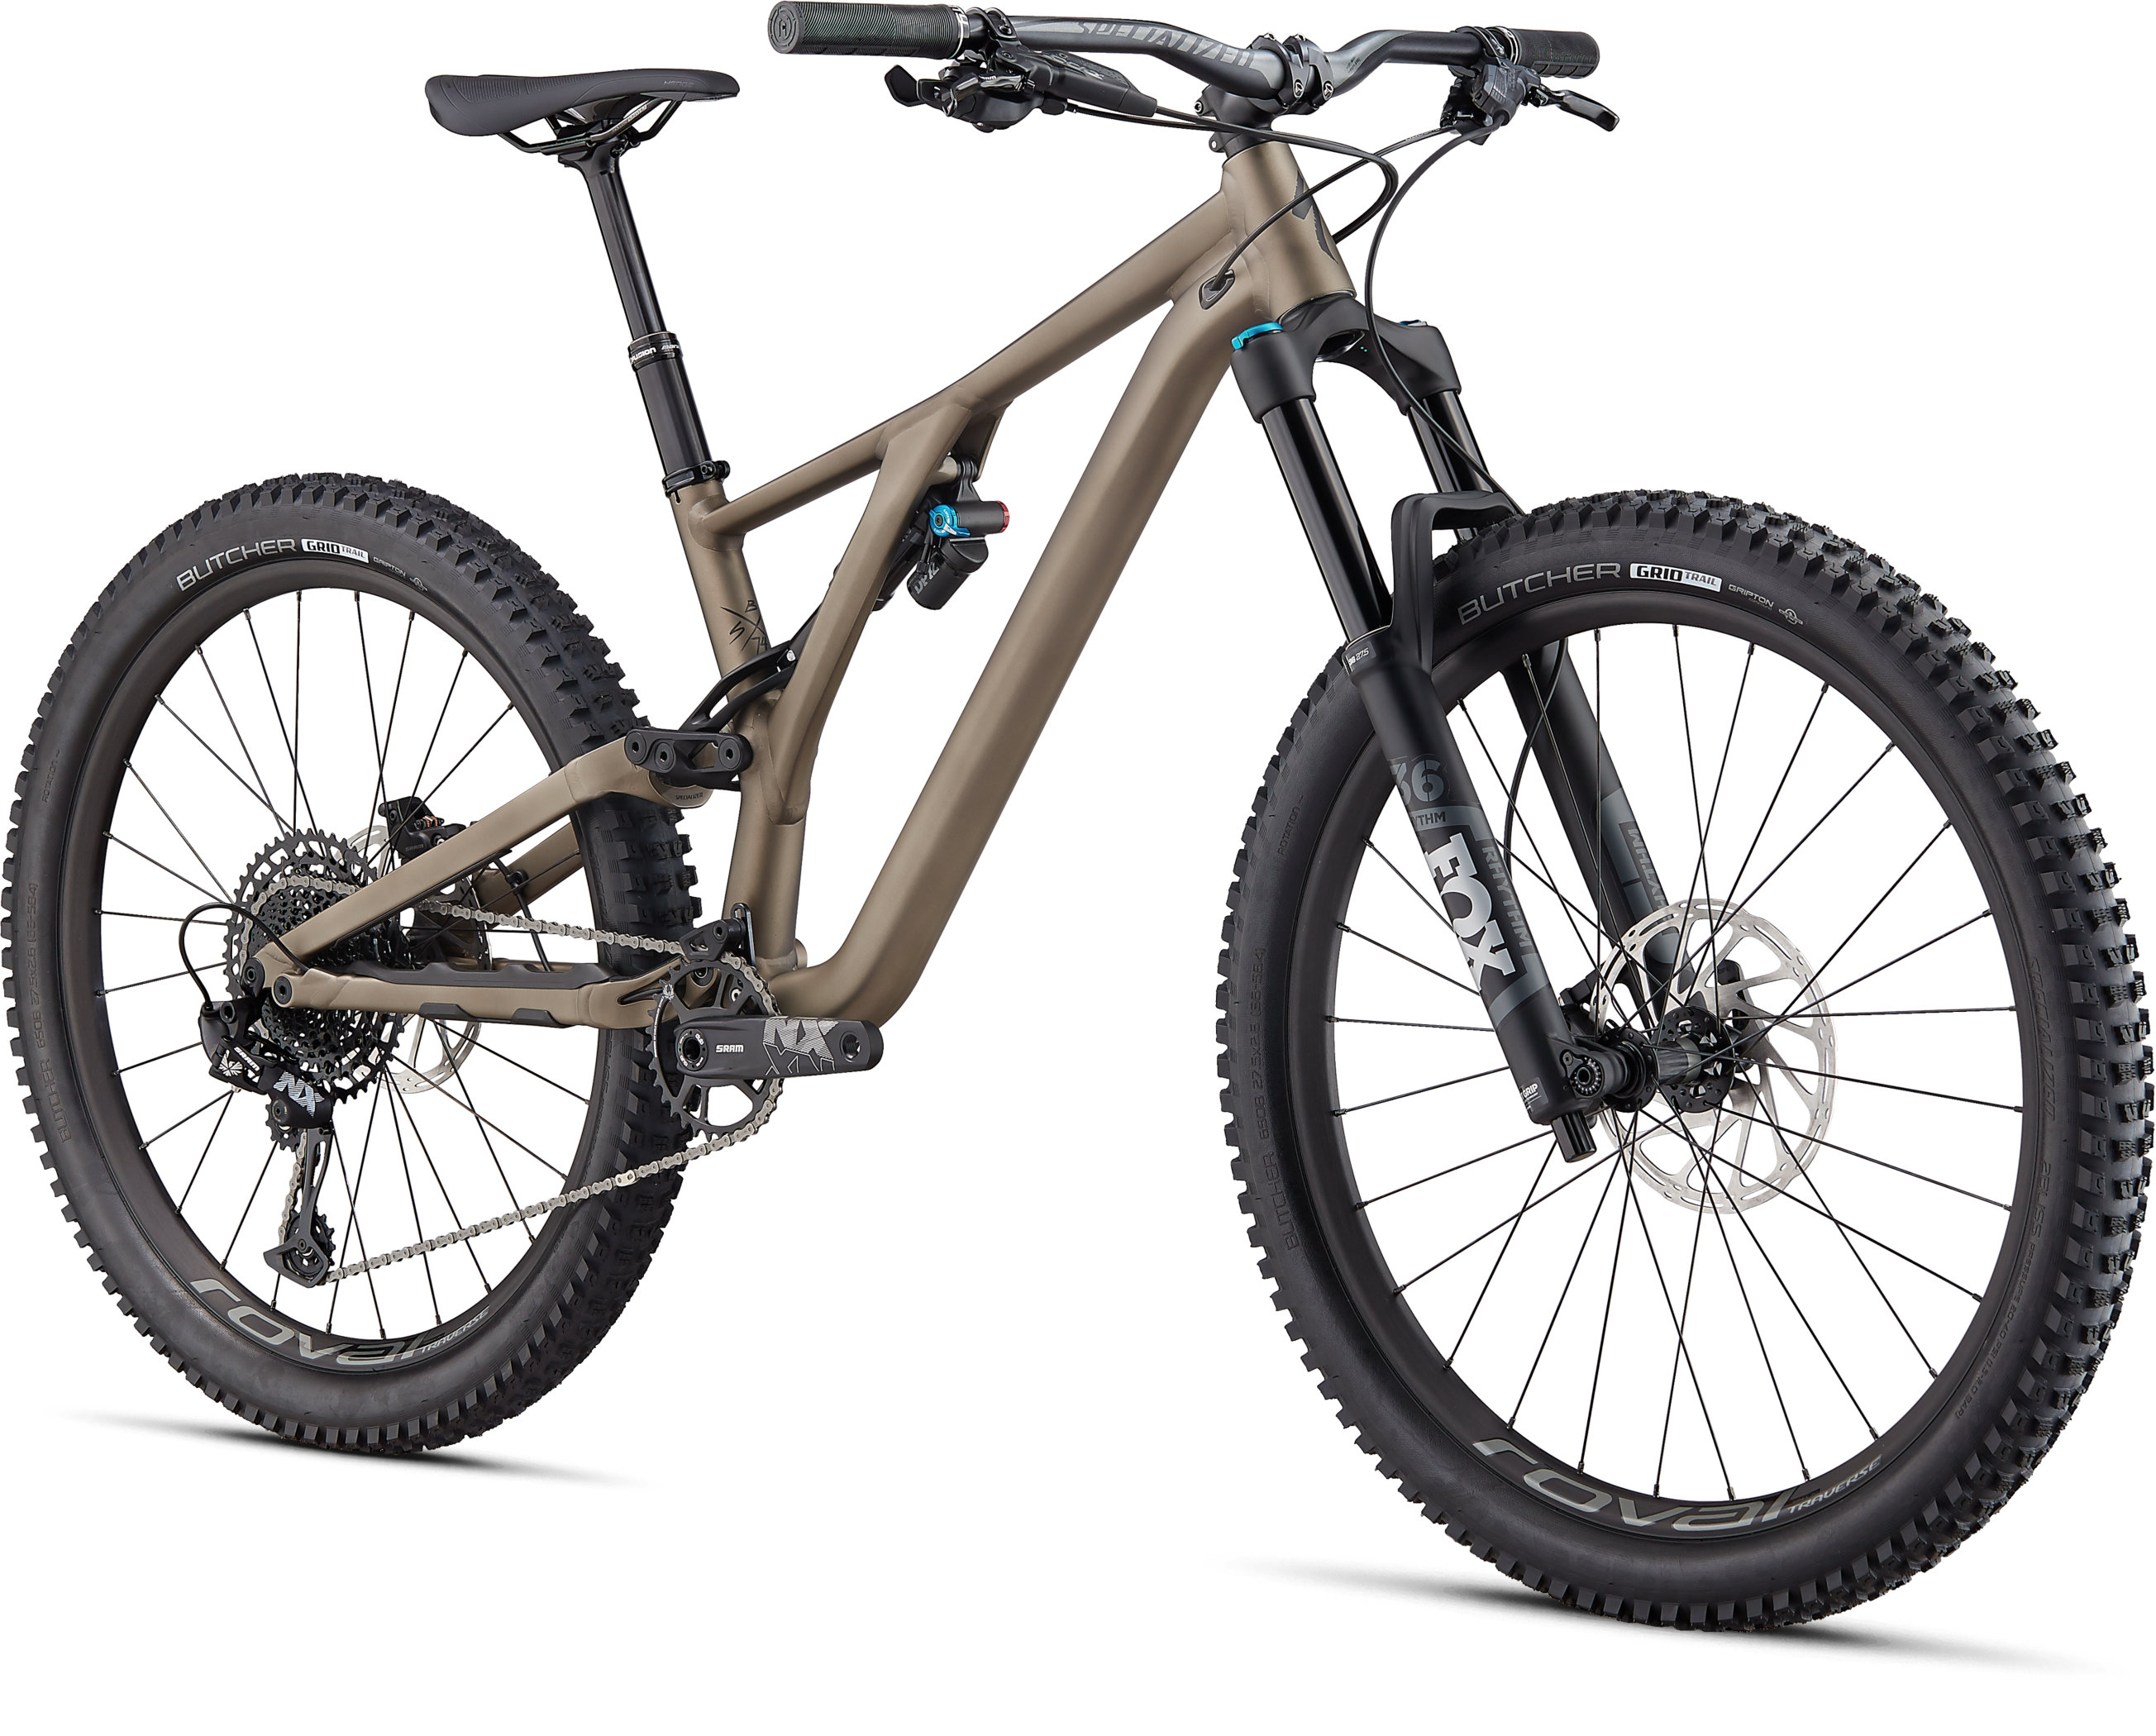 2019 specialized stumpjumper alloy 27.5